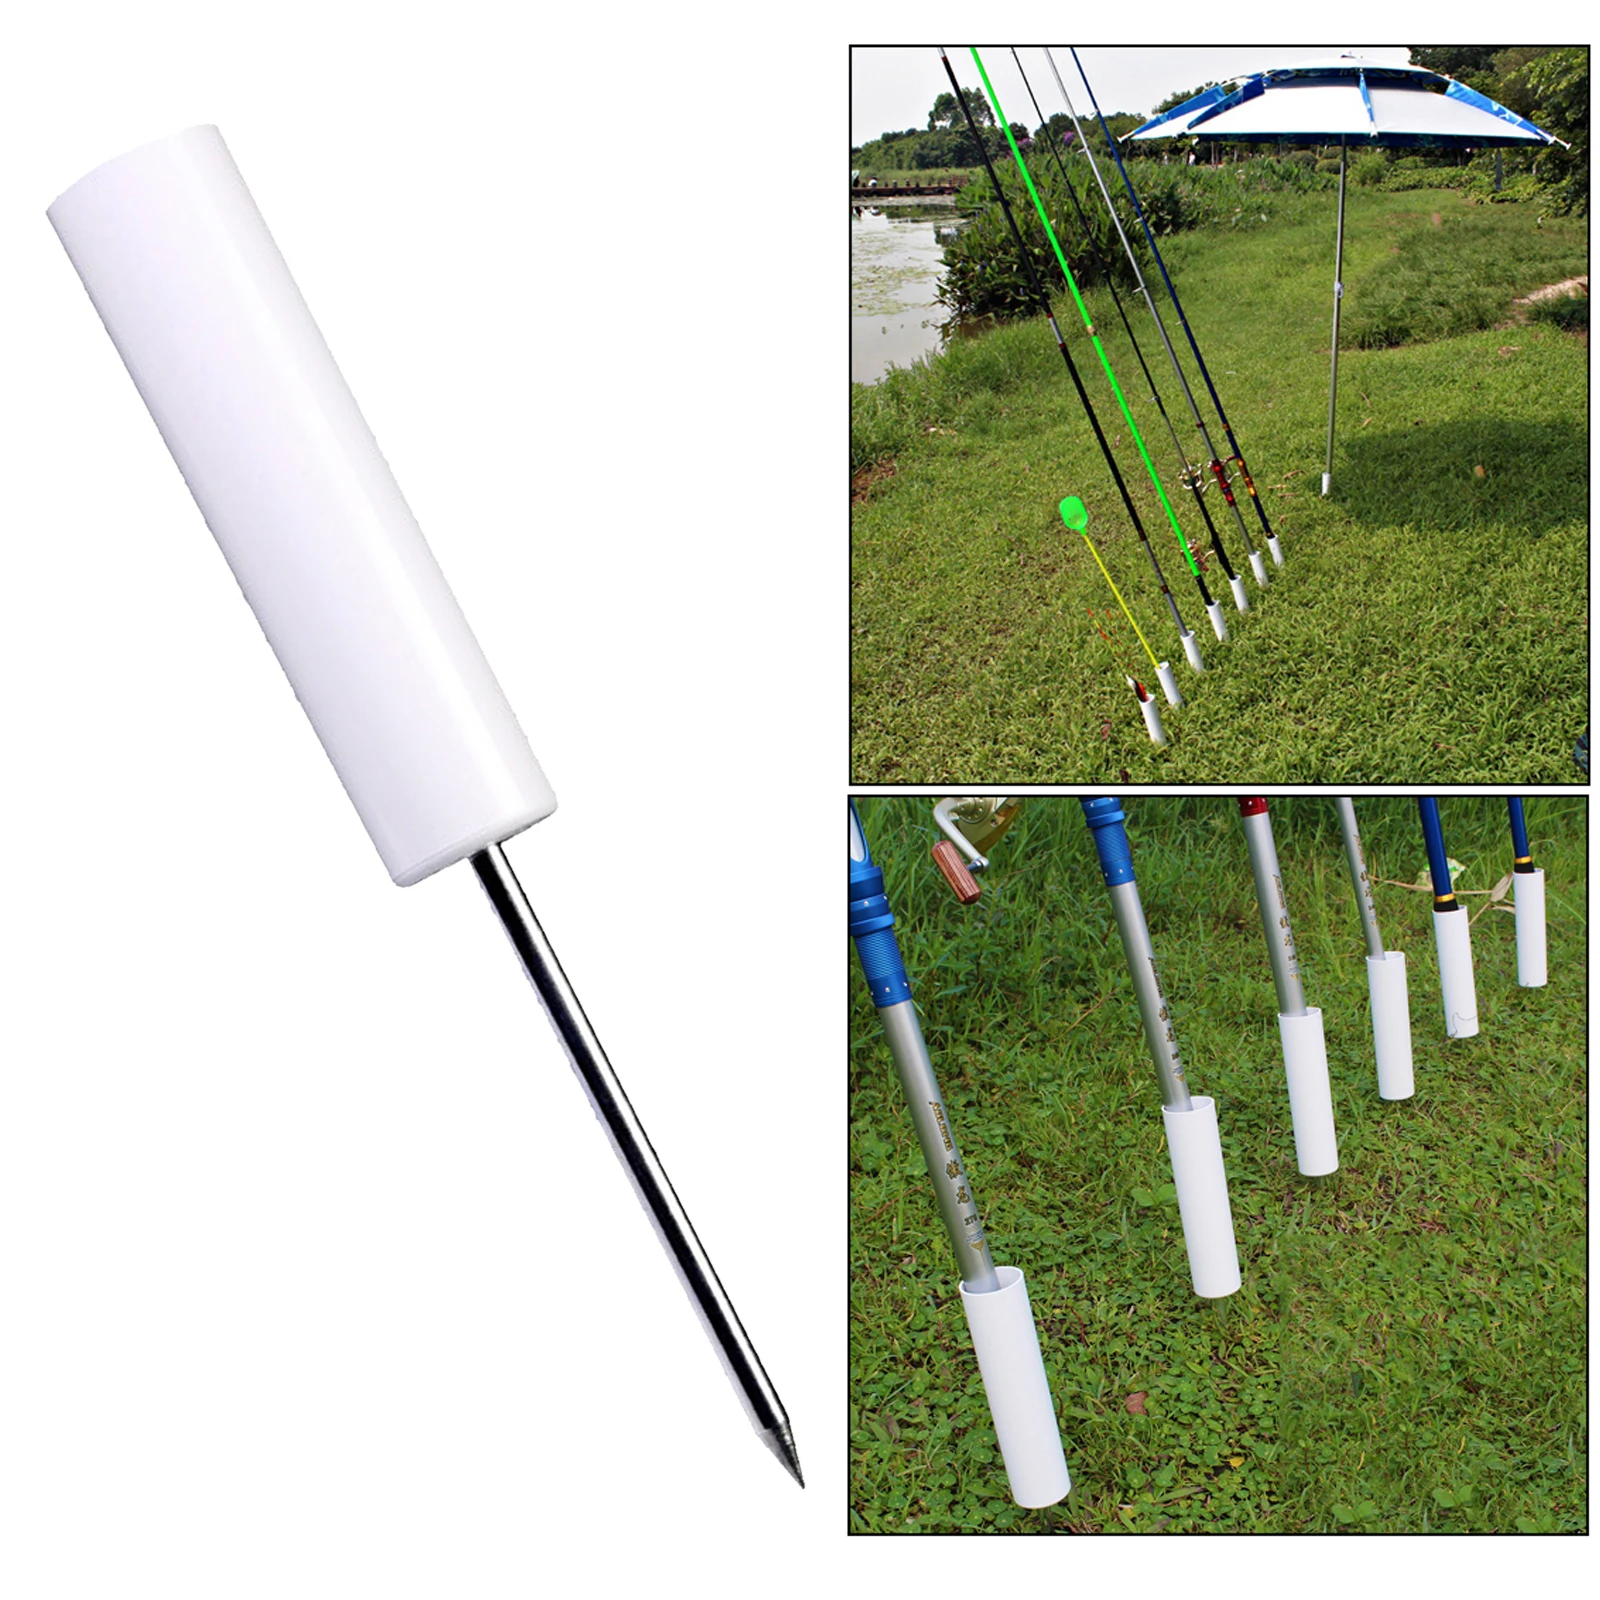 Fishing Rod Pole Holder Insert Ground Support Universal Reinforced PVC Detachable Pole Stand for Bank Fishing Fishing Supplies